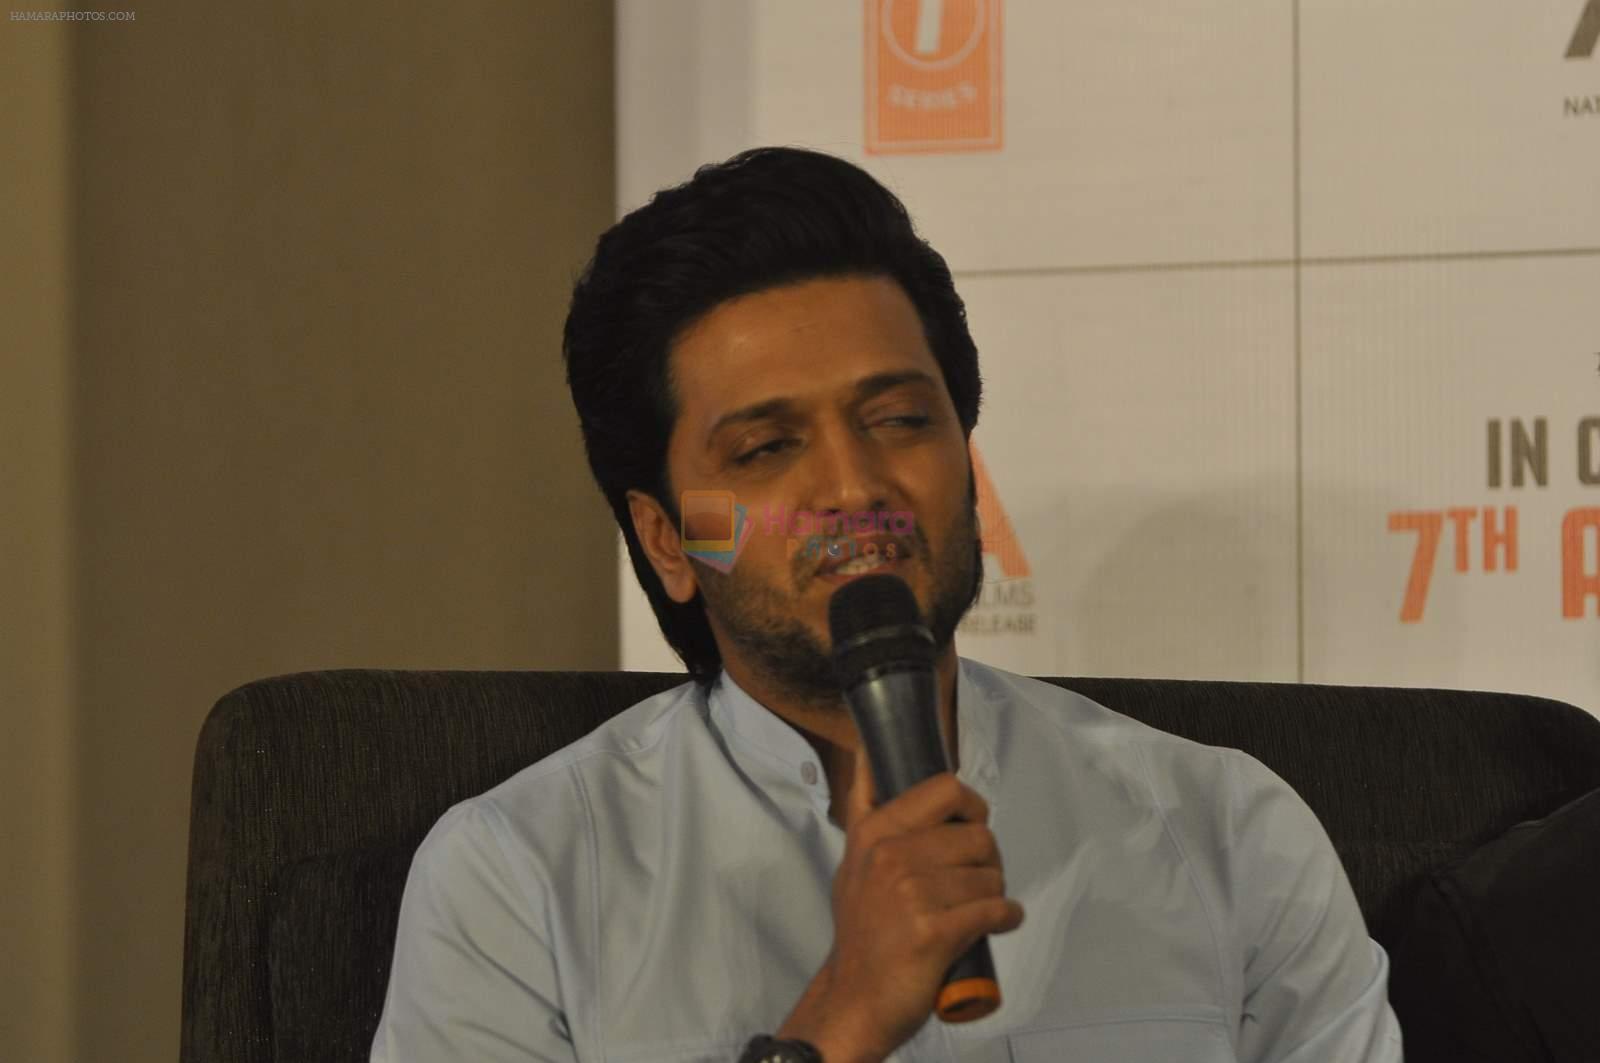 Riteish Deshmukh at Bangistan promotions in J W Marriott on 31st July 2015